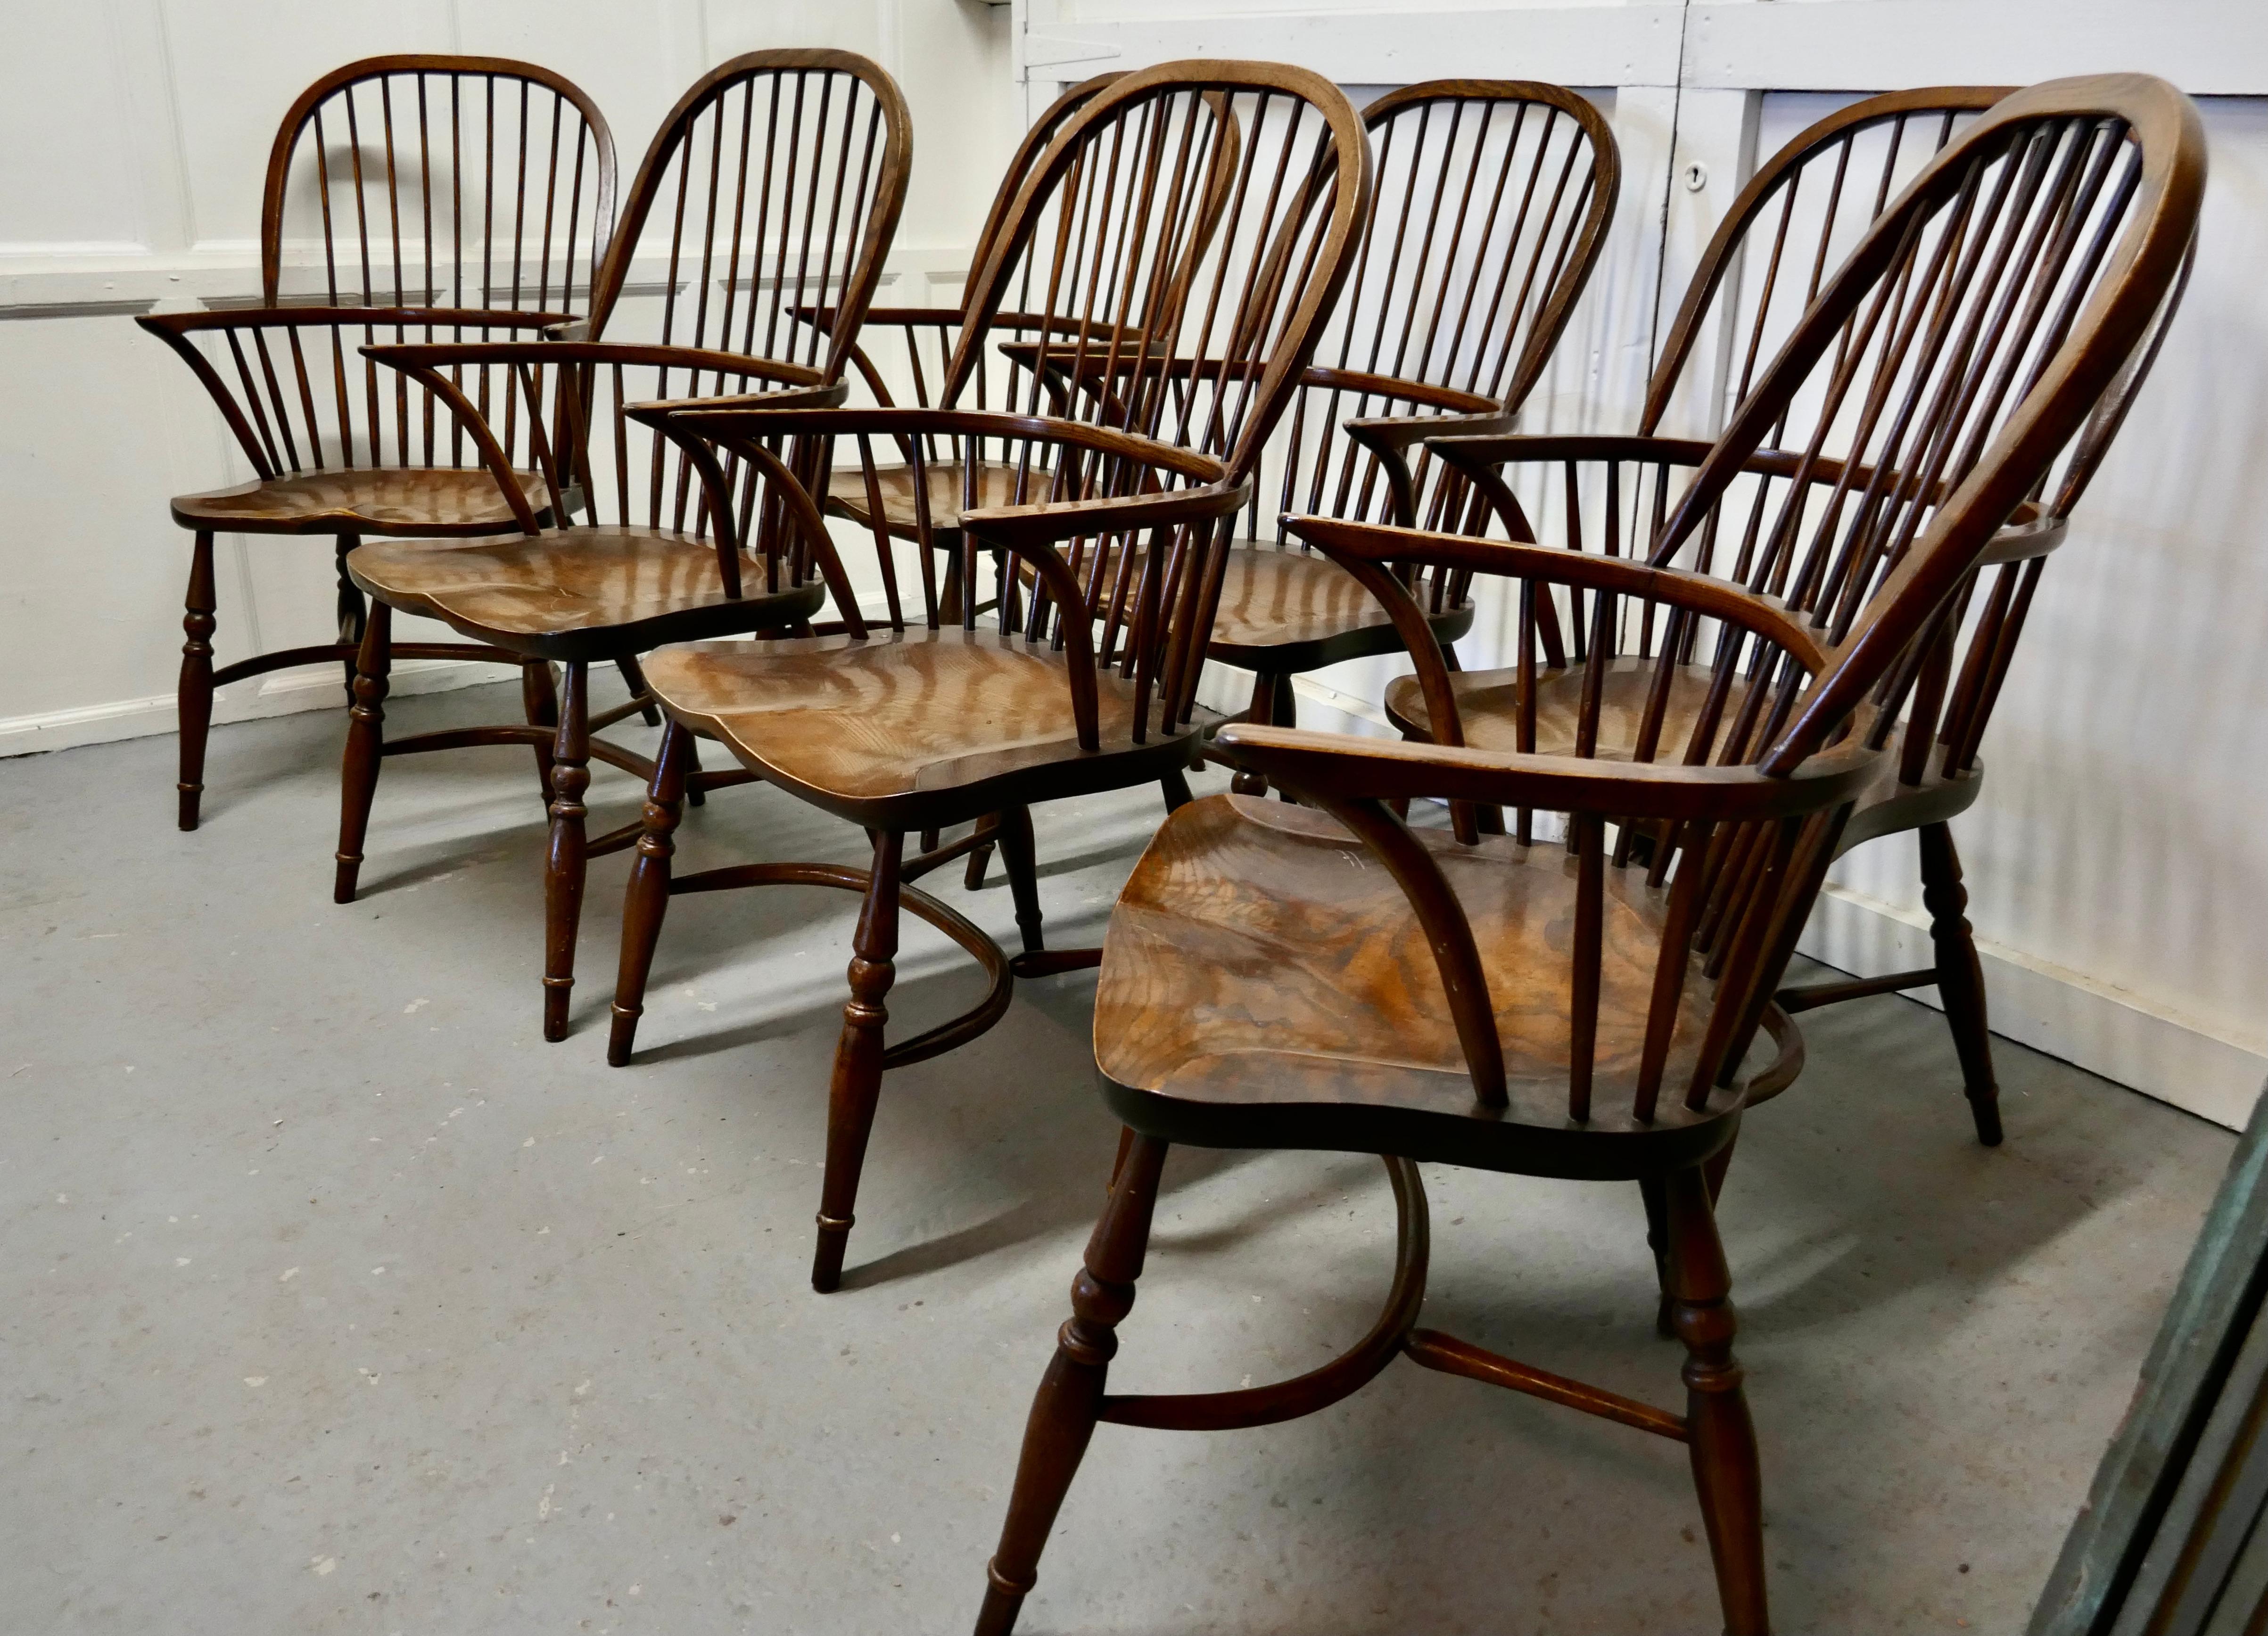 Set of 7 Arts & Crafts beech and elm windsor carver chairs


The chairs are large pieces with a Saddle seat, turned legs and a crinoline stretcher 
The chairs were made in the 1960s, they are are a timeless classic made from Beech and Elm in the